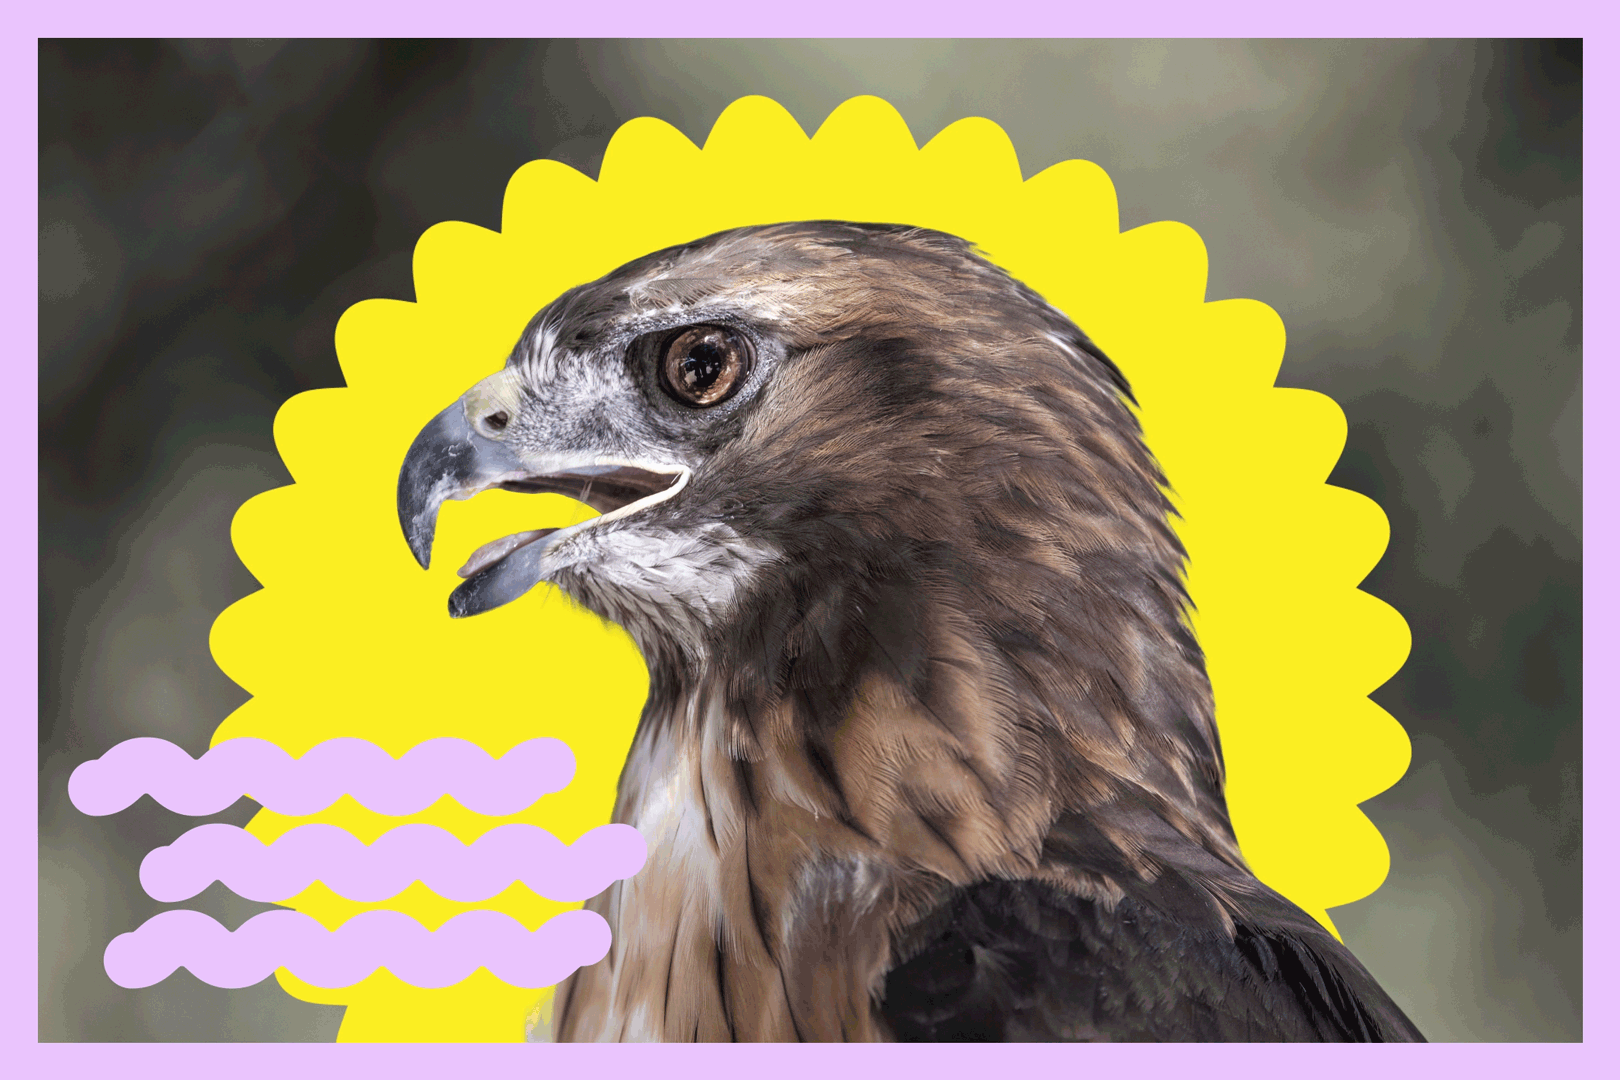 A red tail hawk against an animated yellow sun and a few purple squiggly lines.